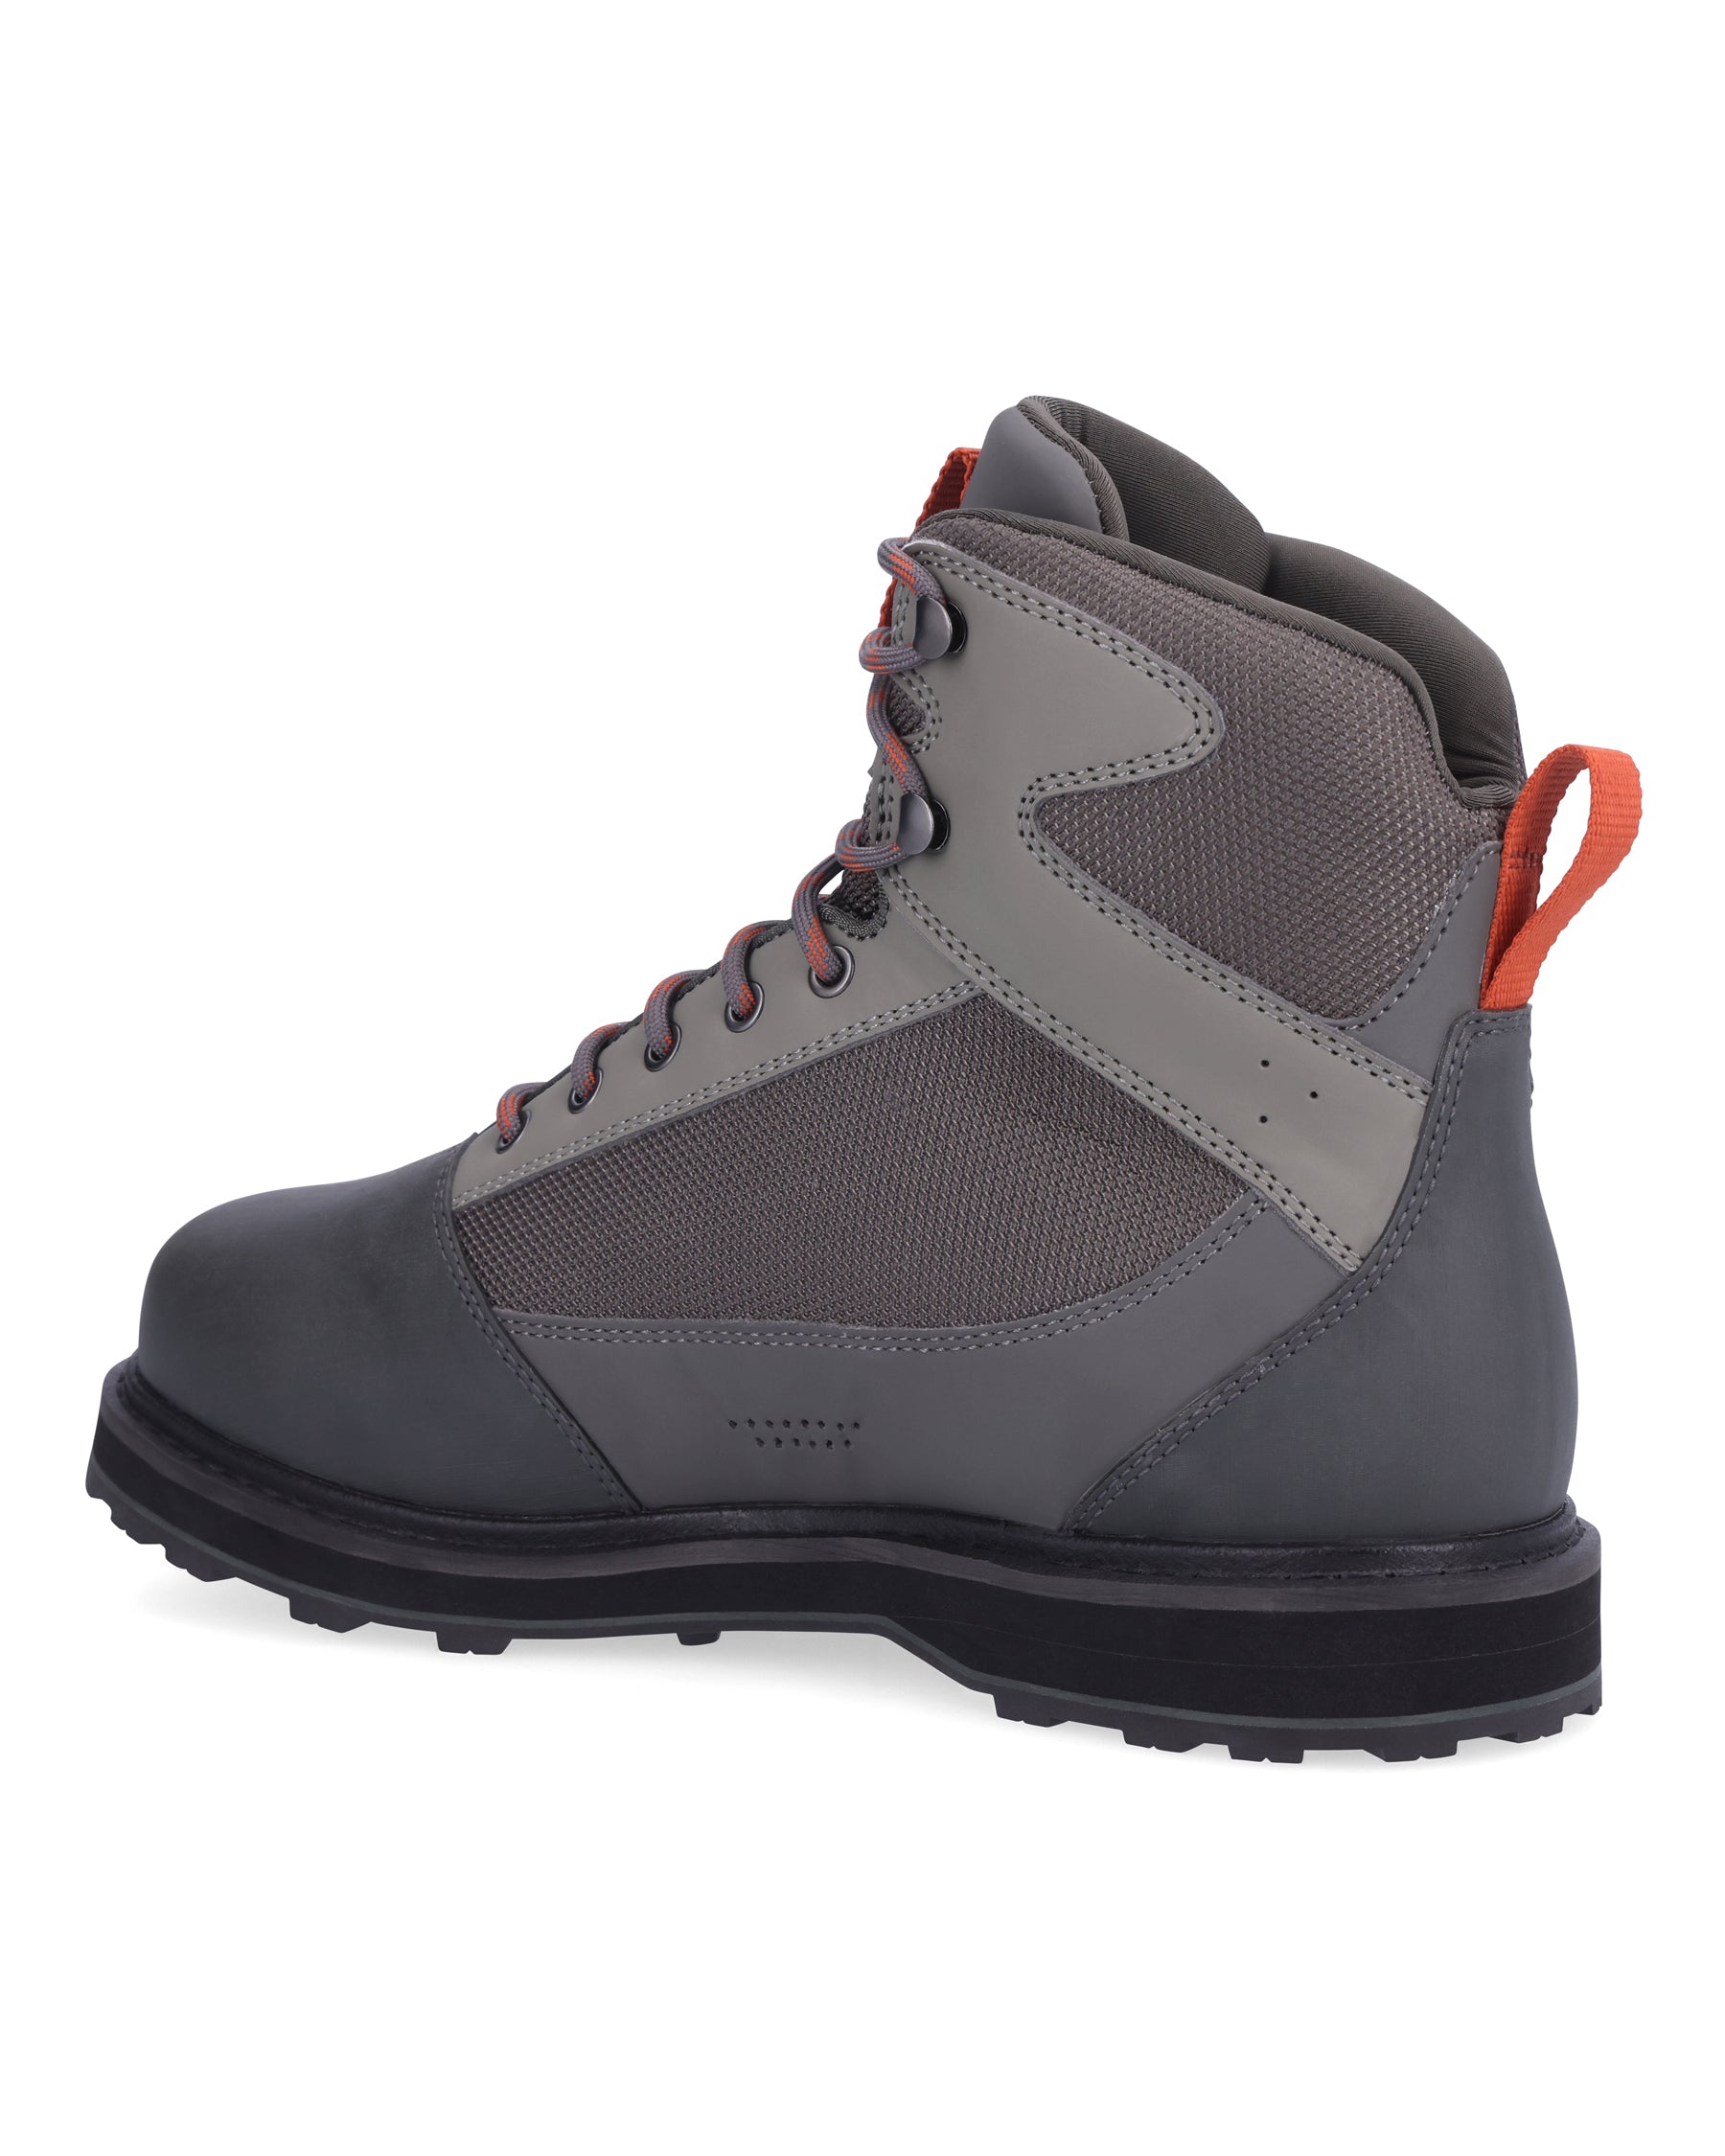 Simms M's Tributary (23) Boot Rubber